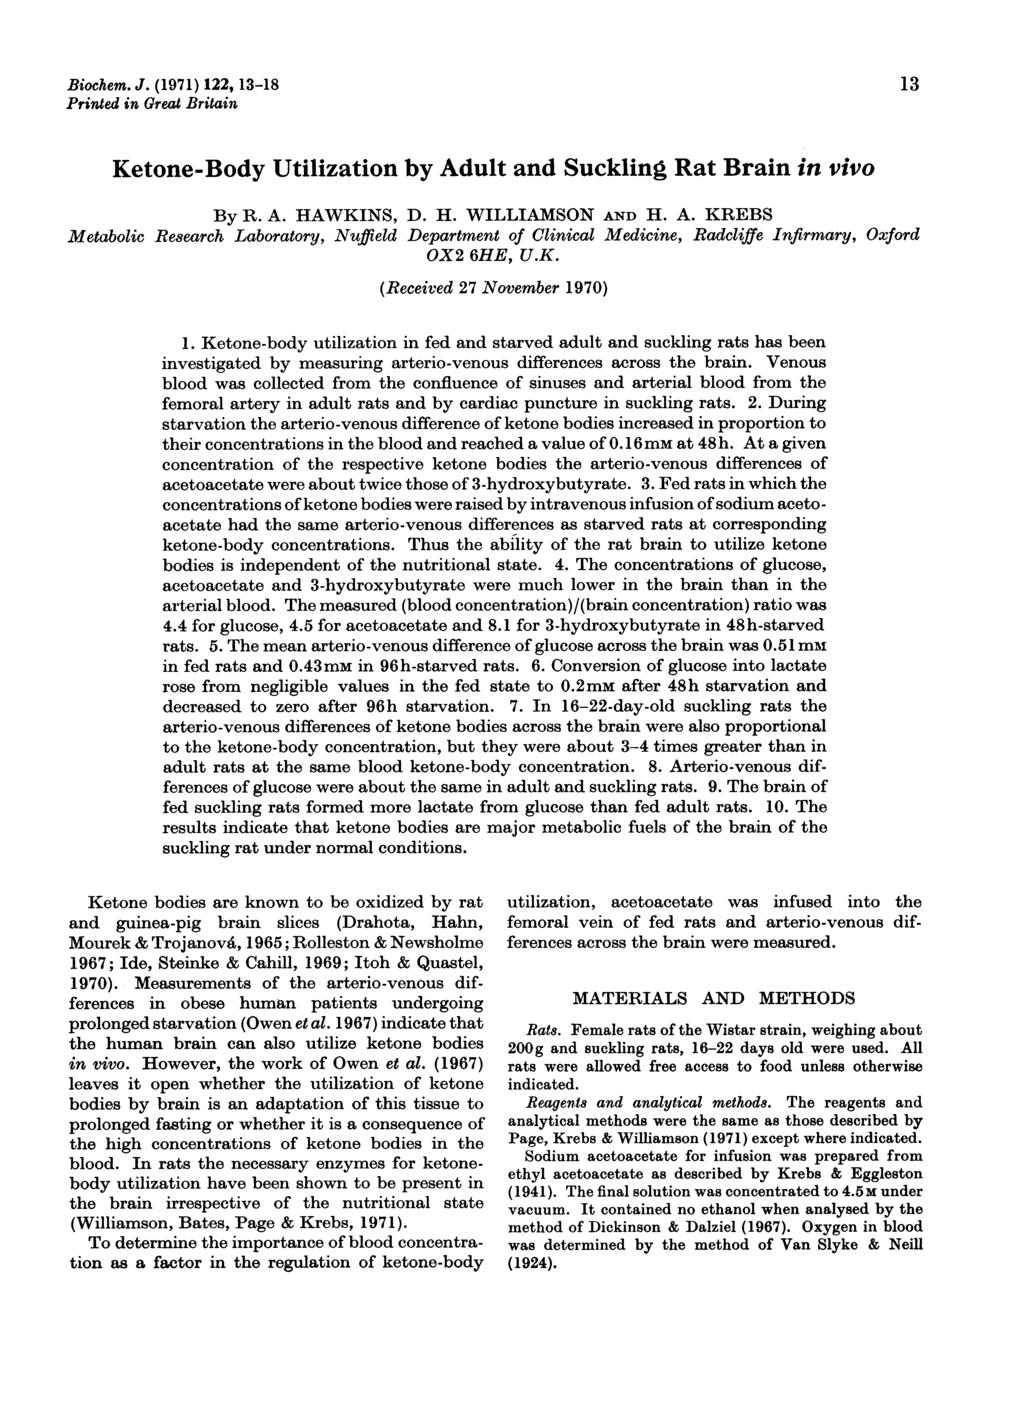 Bichem. J. (1971) 122, 13-18 13 Printed in Great Britain Ketne-Bdy Utilizatin by Adult and Suckling Rat Brain in viv By R. A. HAWKINS, D. H. WILLIAMSN AND H. A. KREBS Metablic Research Labratry, Nuffield Department f linical Medicine, Radcliffe Infirmary, xfrd X2 6HE, U.